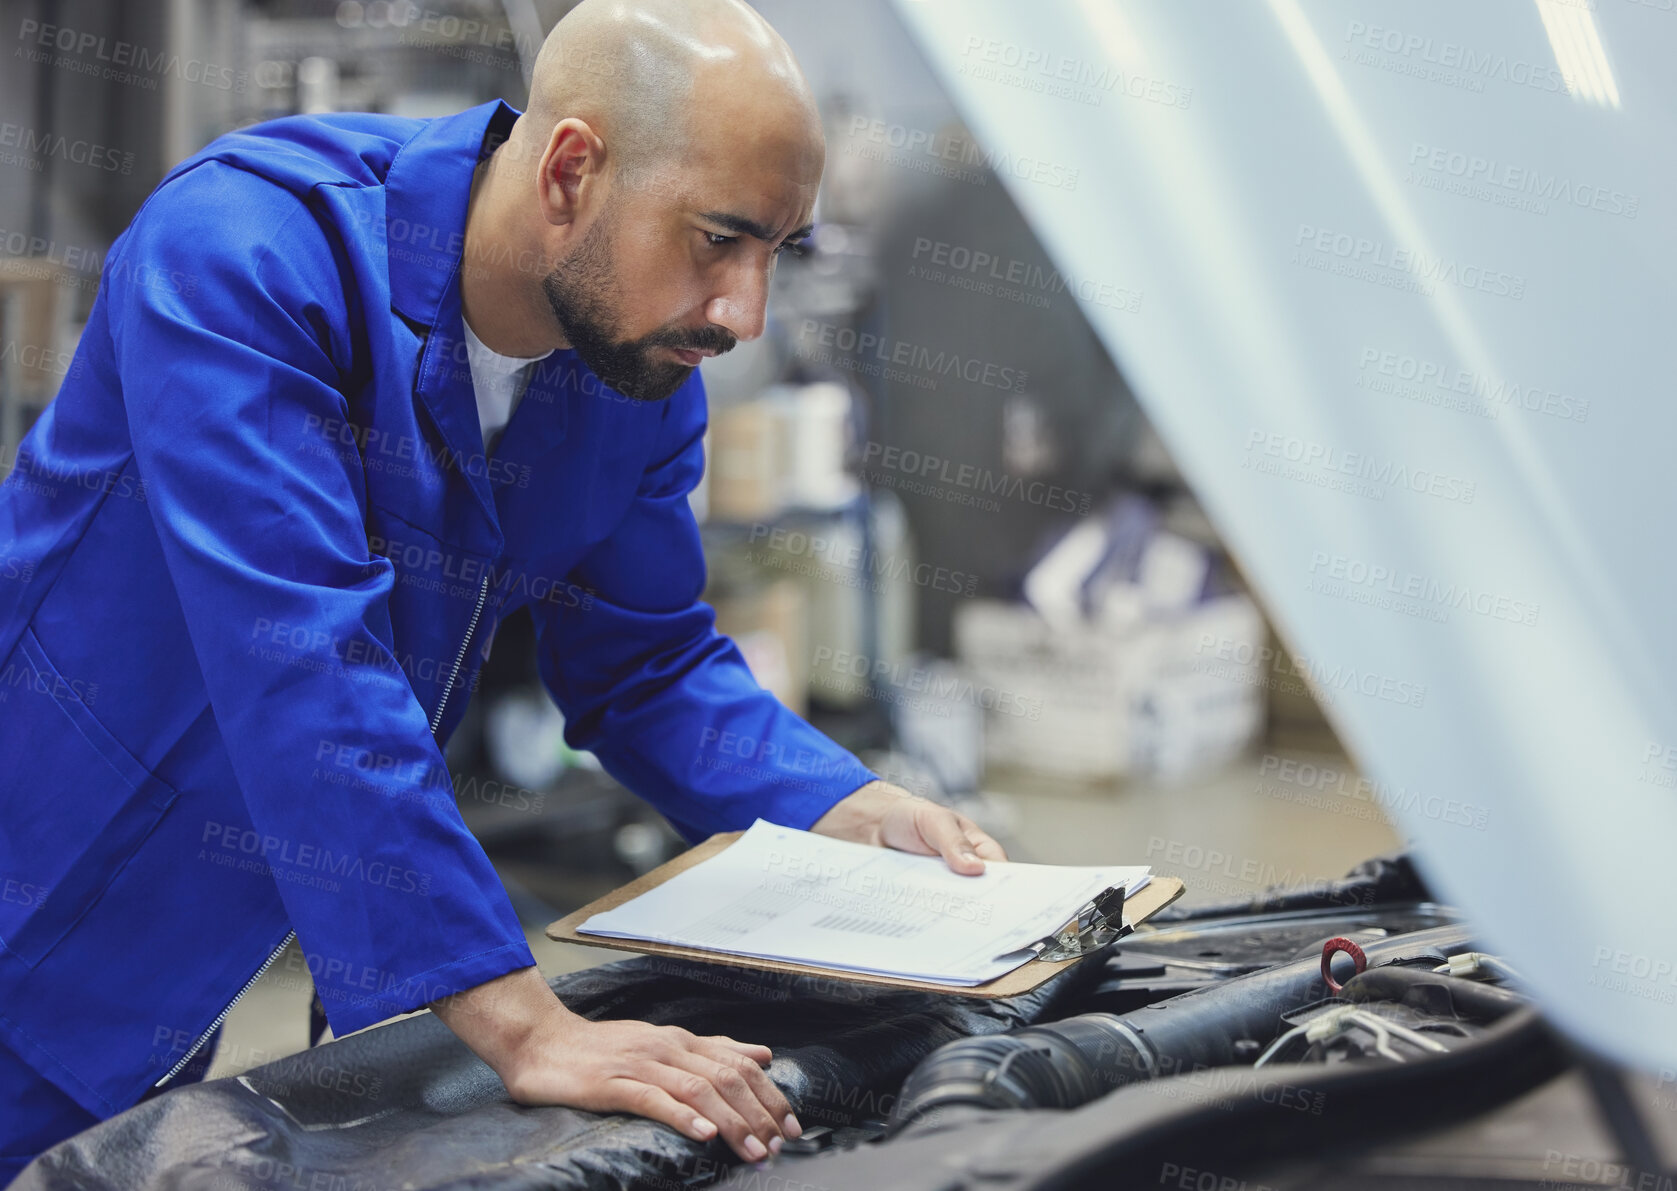 Buy stock photo Cropped shot of a handsome young male mechanic working on the engine of a car during a service